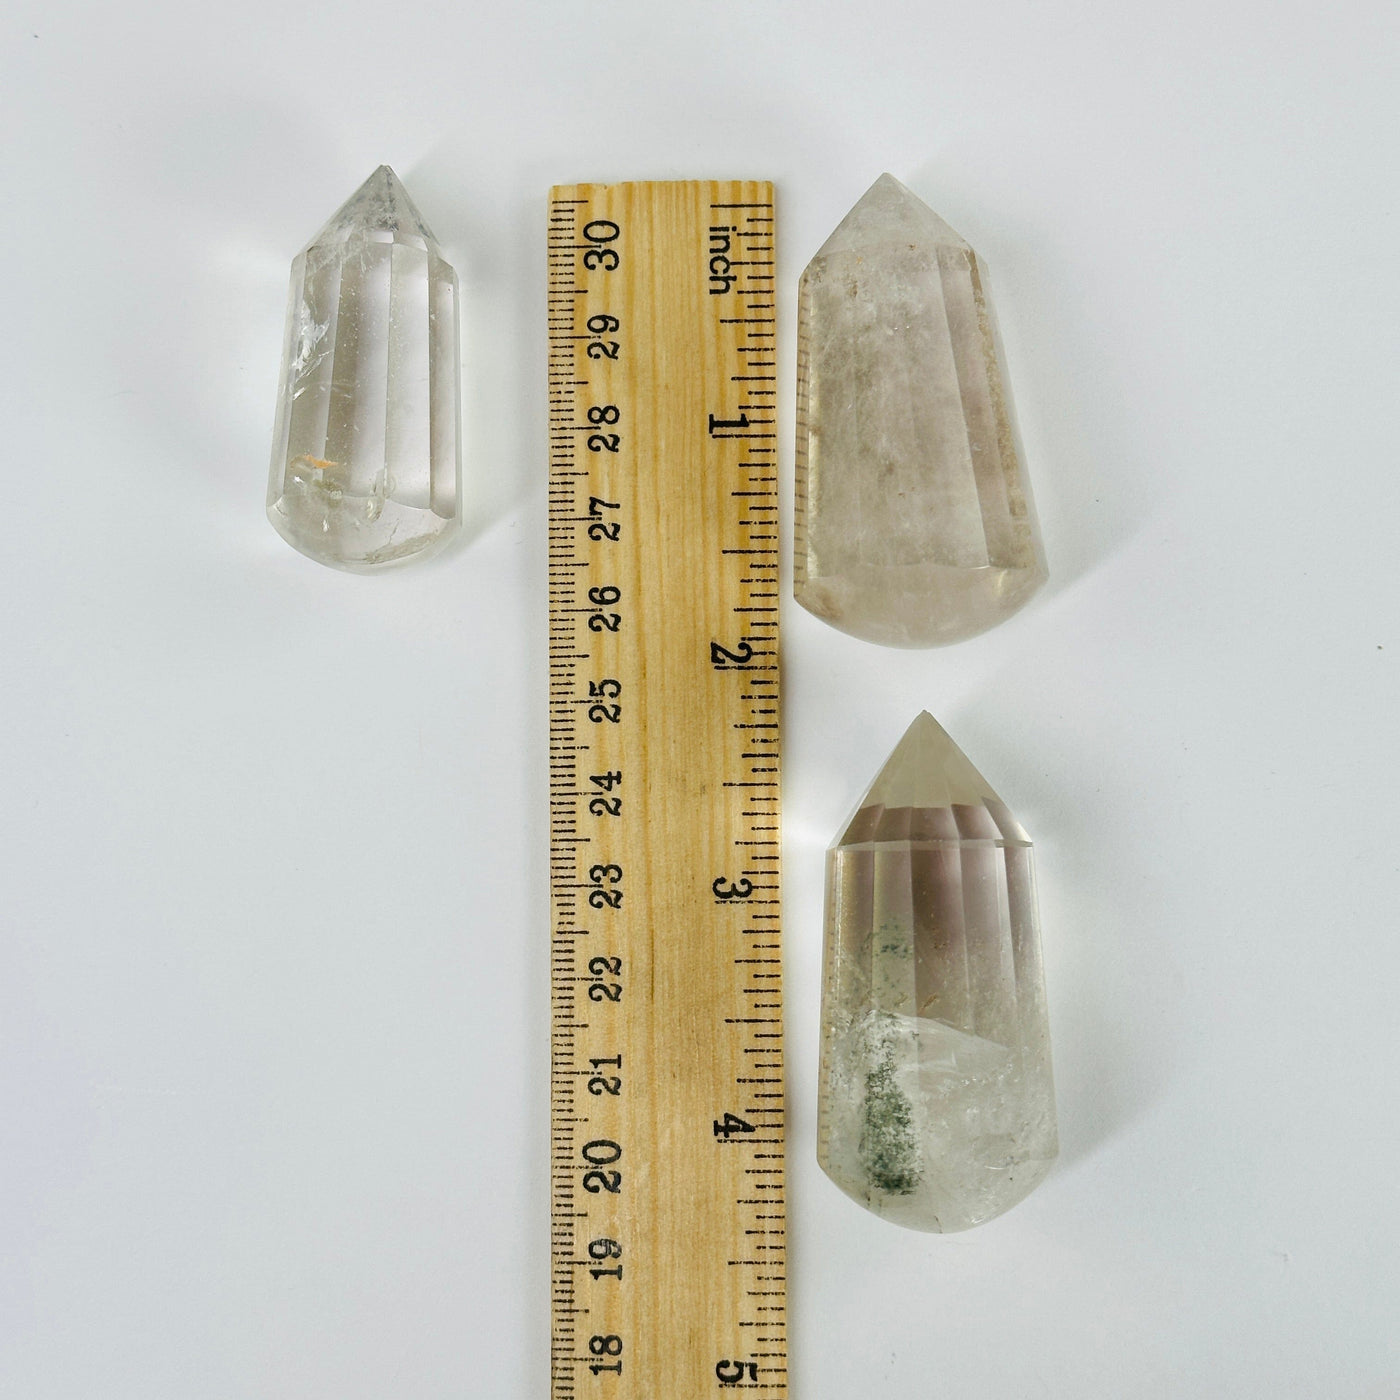 crystal quartz massage wands next to a ruler for size reference